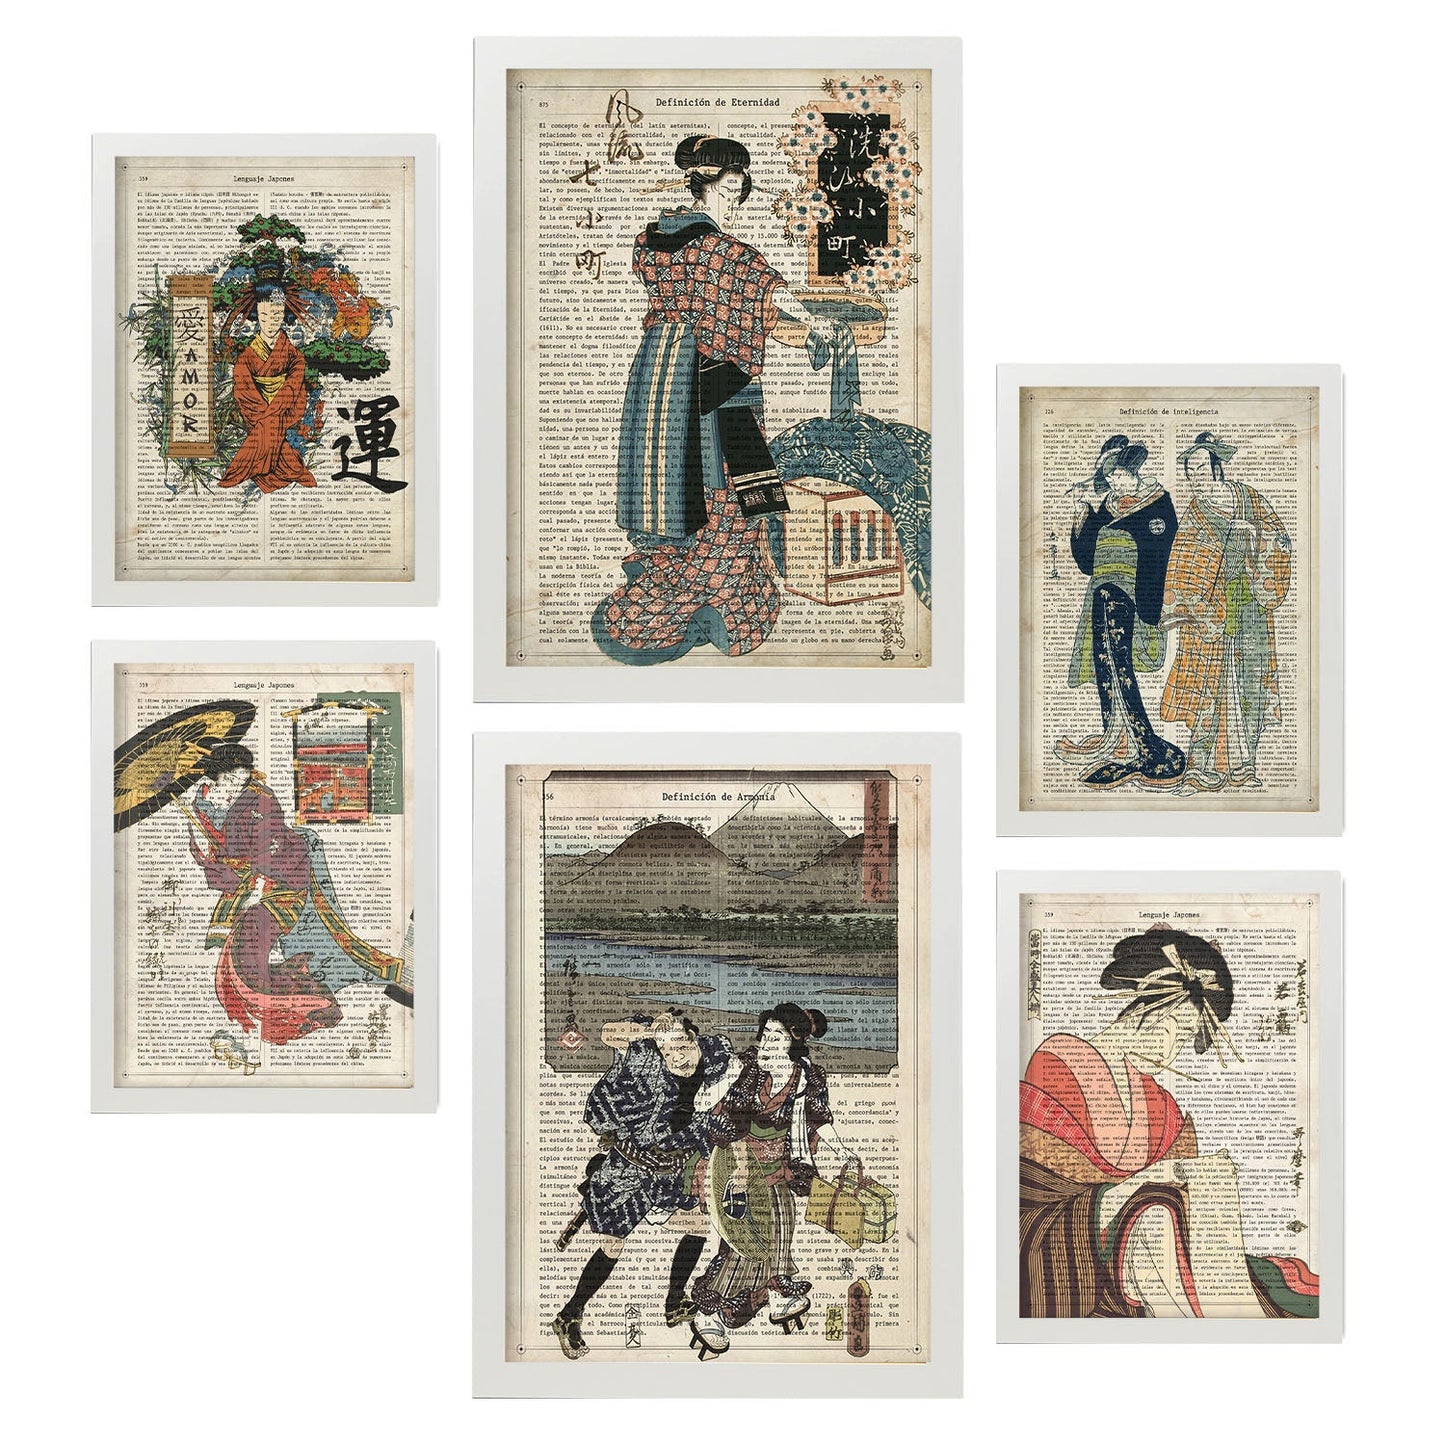 Nacnic japon. Aesthetic Wall Art Prints for Bedroom or Living Room Design.